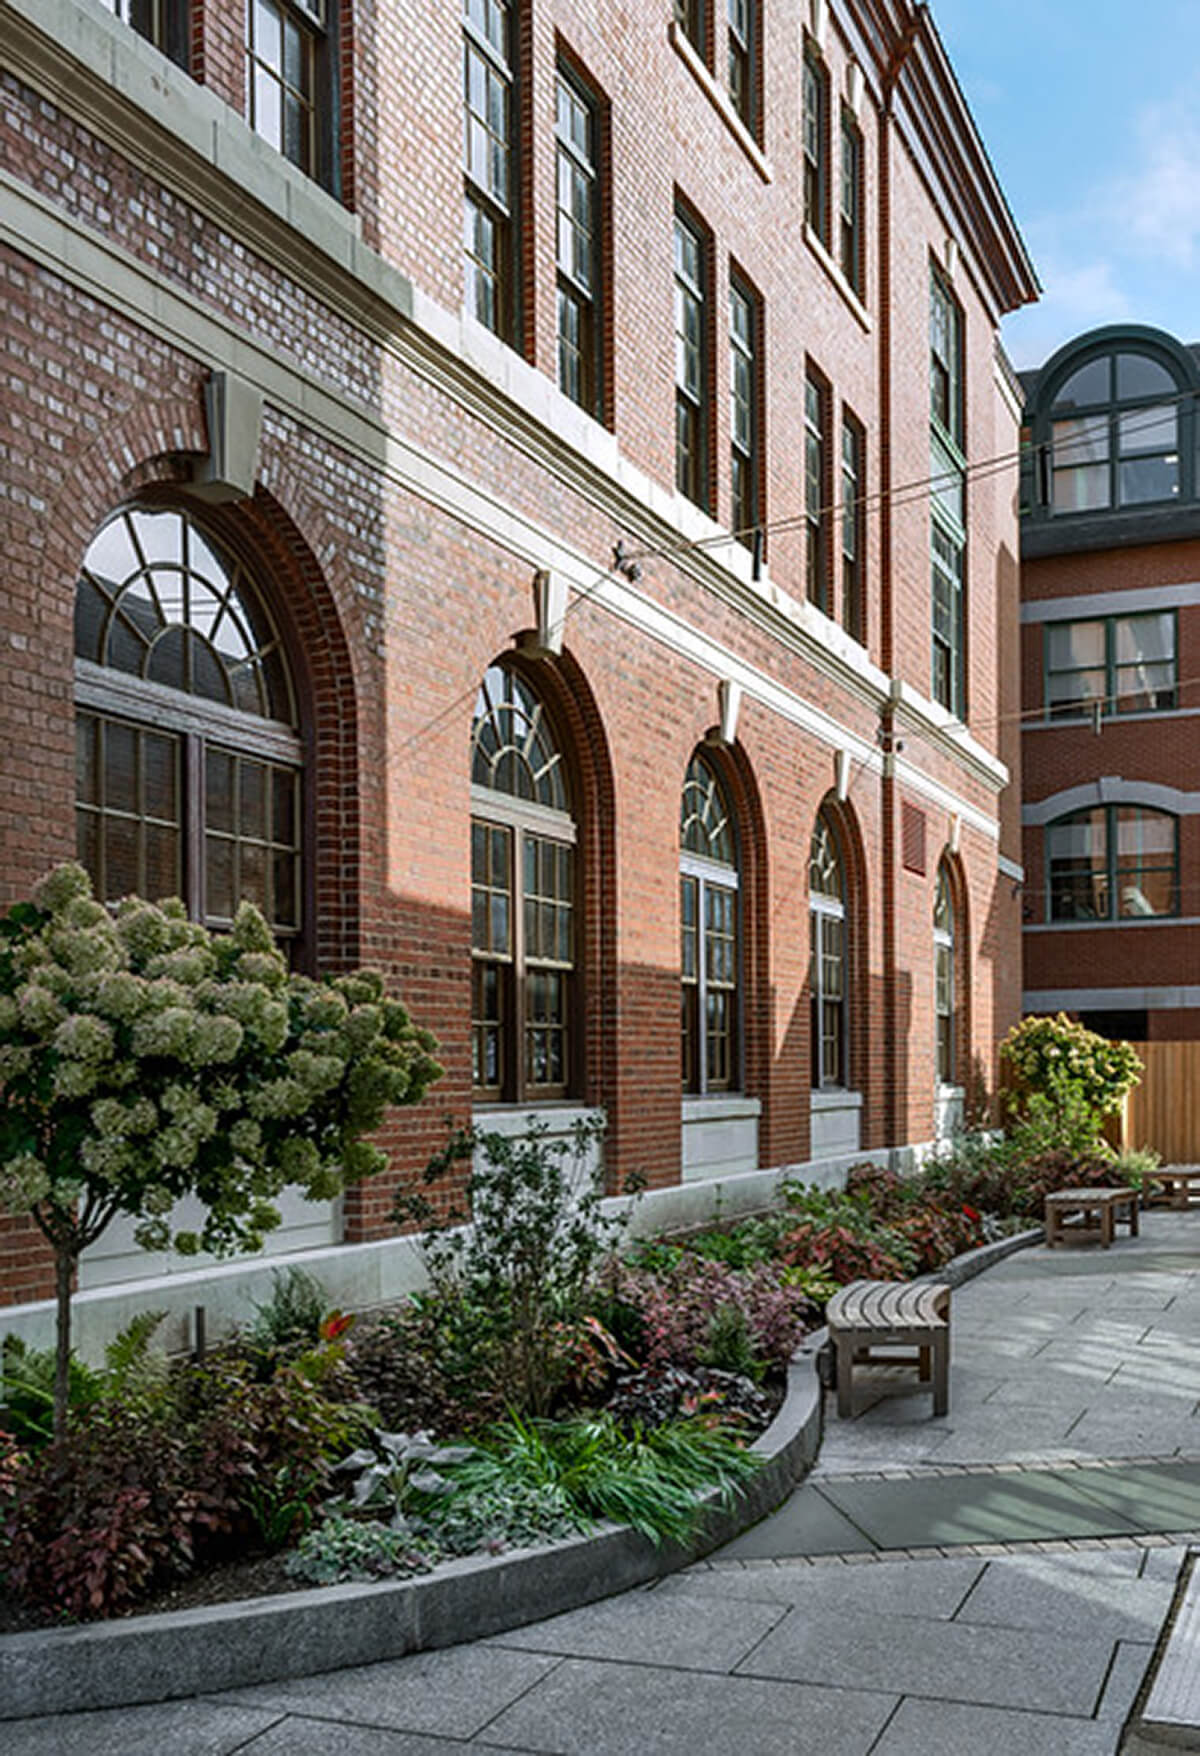 Exterior daytime photo showing the facade edge of a historical brick building with planters beautifying the edge.